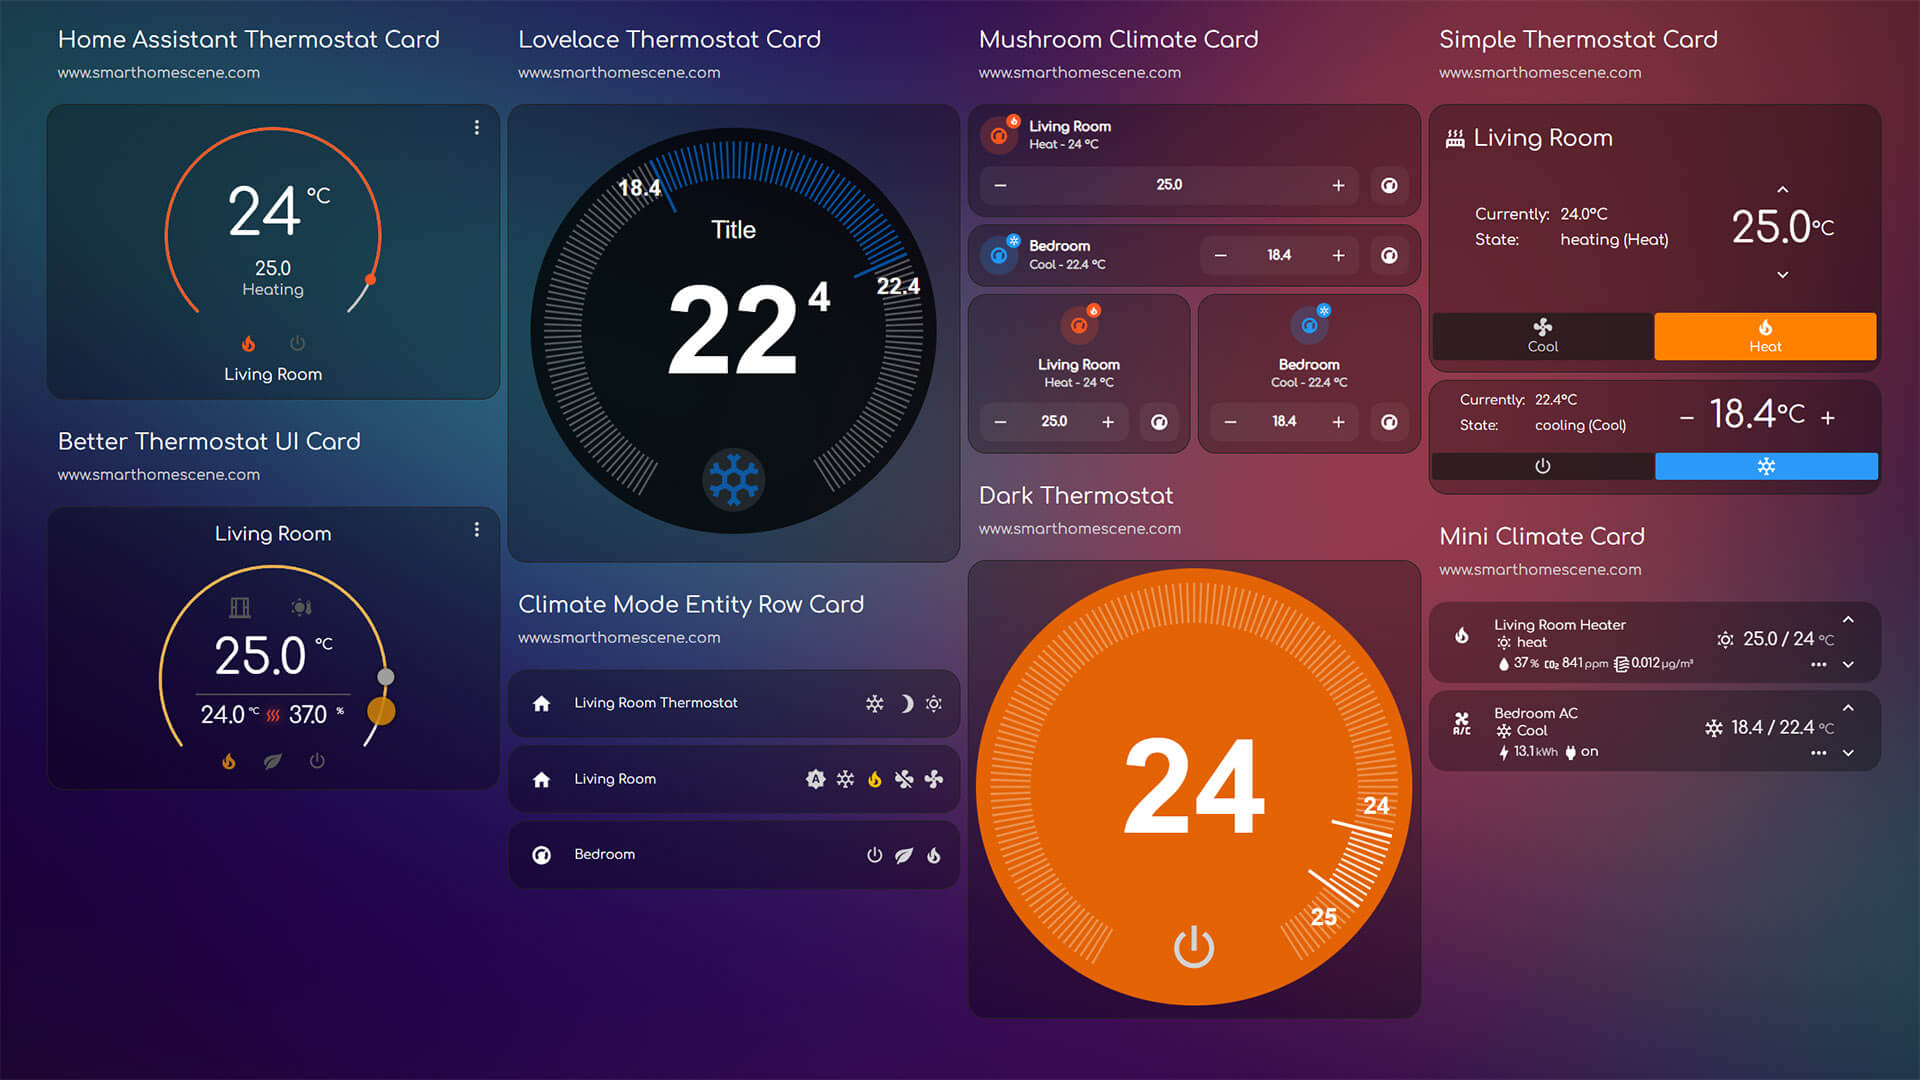 Top 8 Home Assistant Thermostat Cards - SmartHomeScene